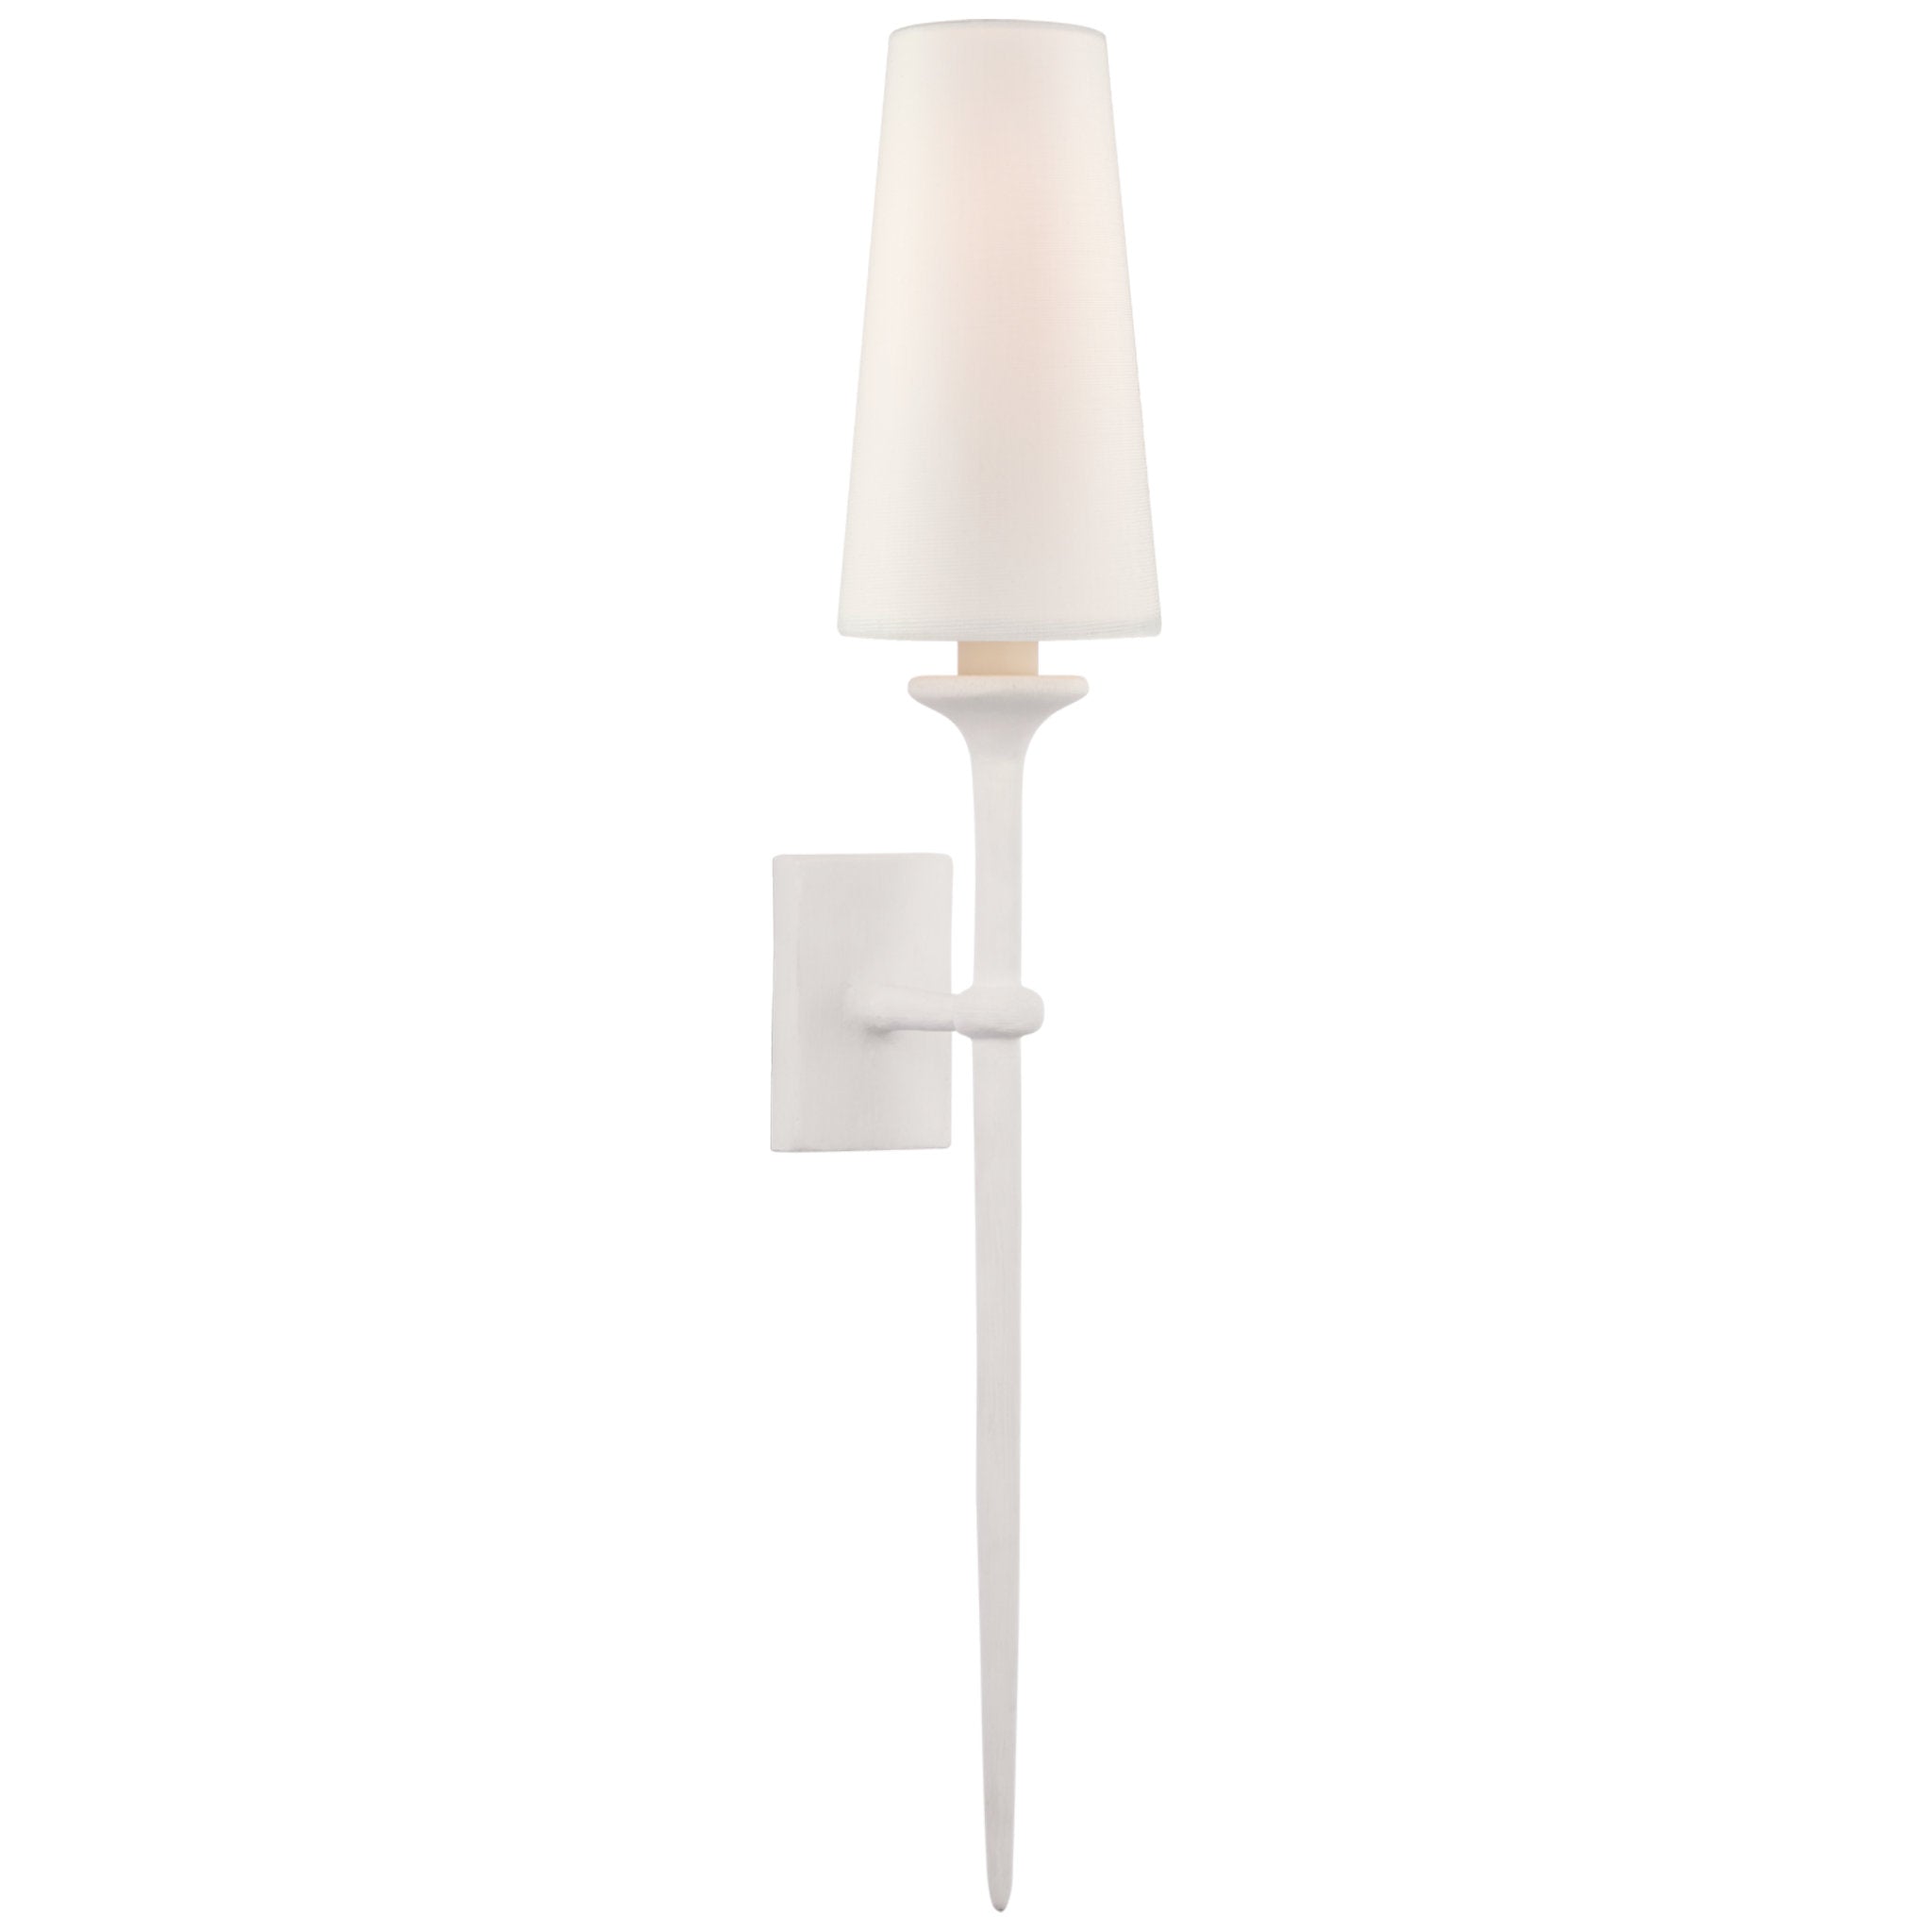 Julie Neill Iberia Single Sconce in Plaster White with Linen Shade